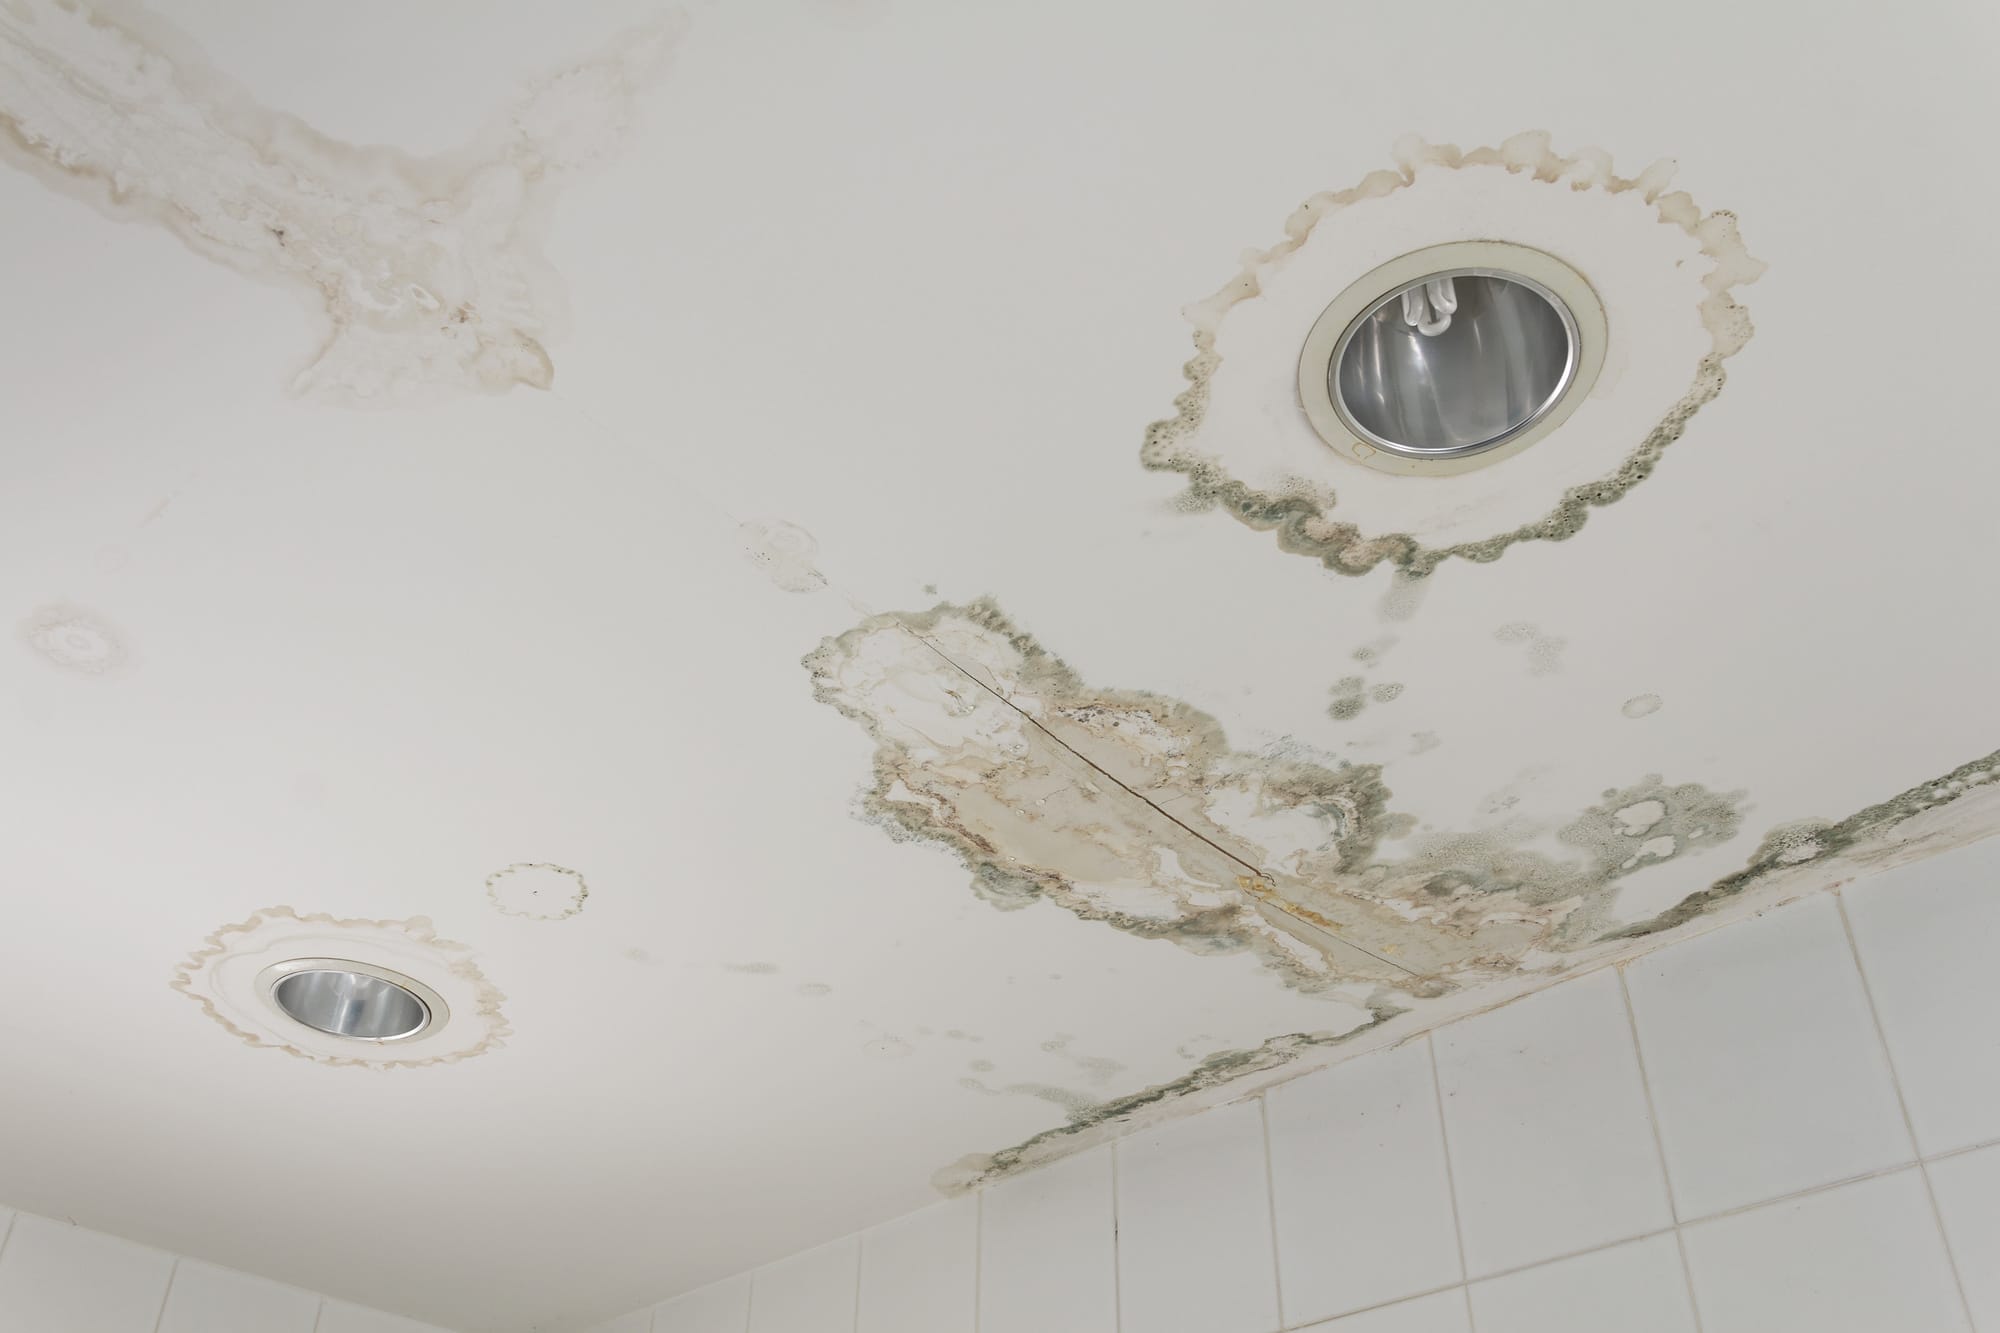 How to Detect and Fix a Bathroom Leak